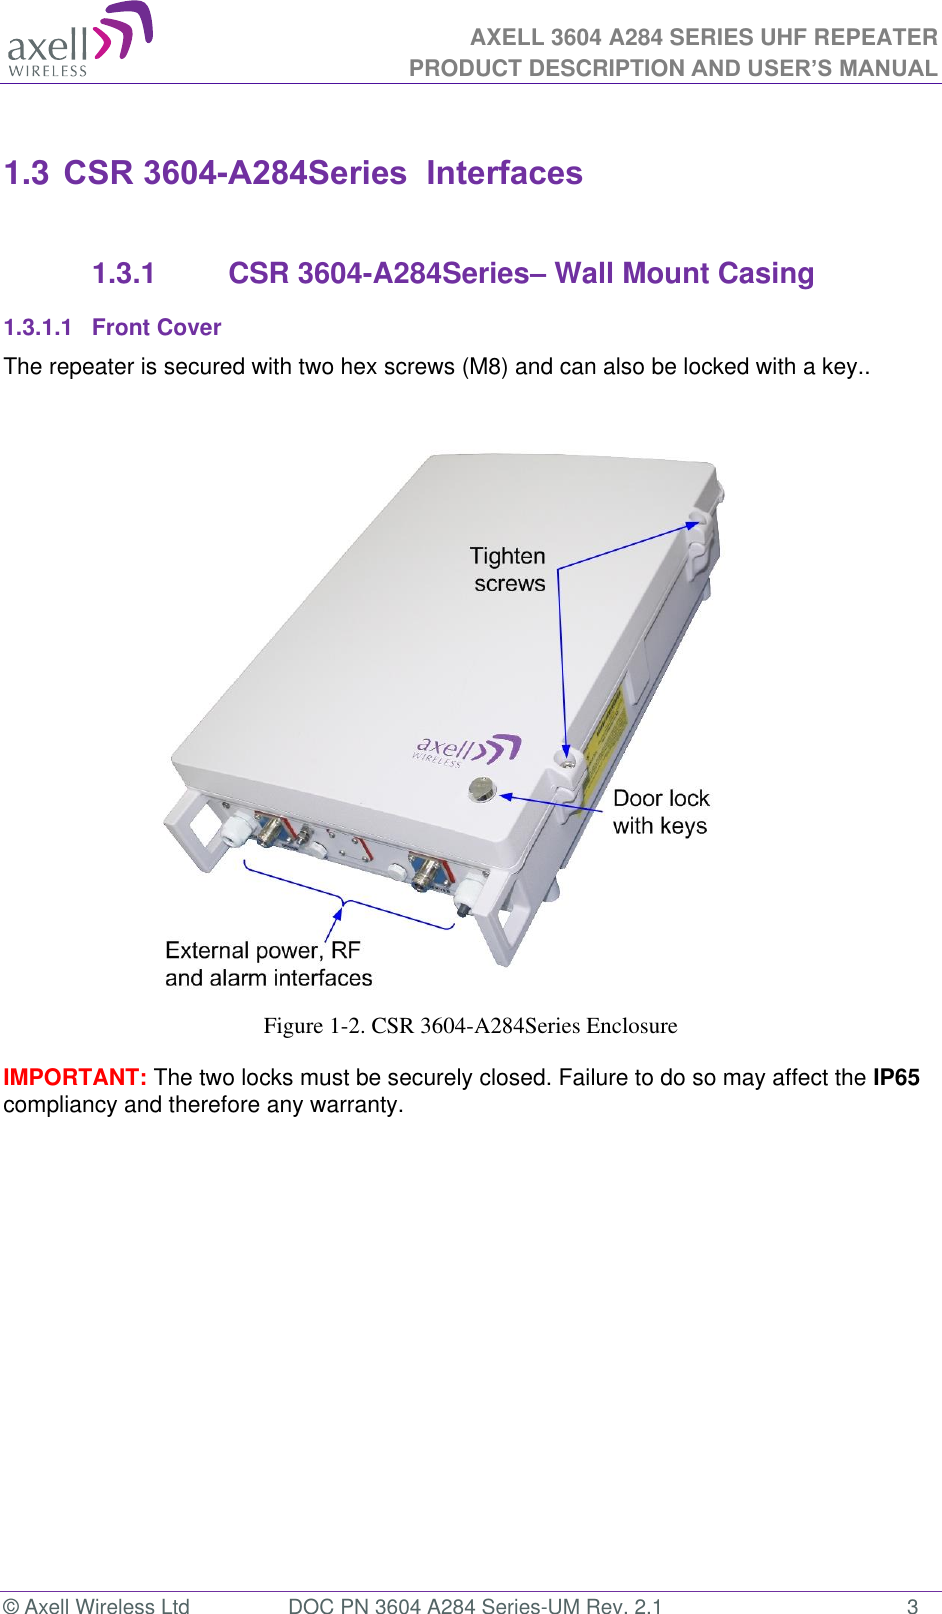 AXELL 3604 A284 SERIES UHF REPEATER PRODUCT DESCRIPTION AND USER’S MANUAL  © Axell Wireless Ltd  DOC PN 3604 A284 Series-UM Rev. 2.1  3  1.3 CSR 3604-A284Series  Interfaces  1.3.1  CSR 3604-A284Series– Wall Mount Casing 1.3.1.1  Front Cover The repeater is secured with two hex screws (M8) and can also be locked with a key..                         Figure 1-2. CSR 3604-A284Series Enclosure  IMPORTANT: The two locks must be securely closed. Failure to do so may affect the IP65 compliancy and therefore any warranty.       